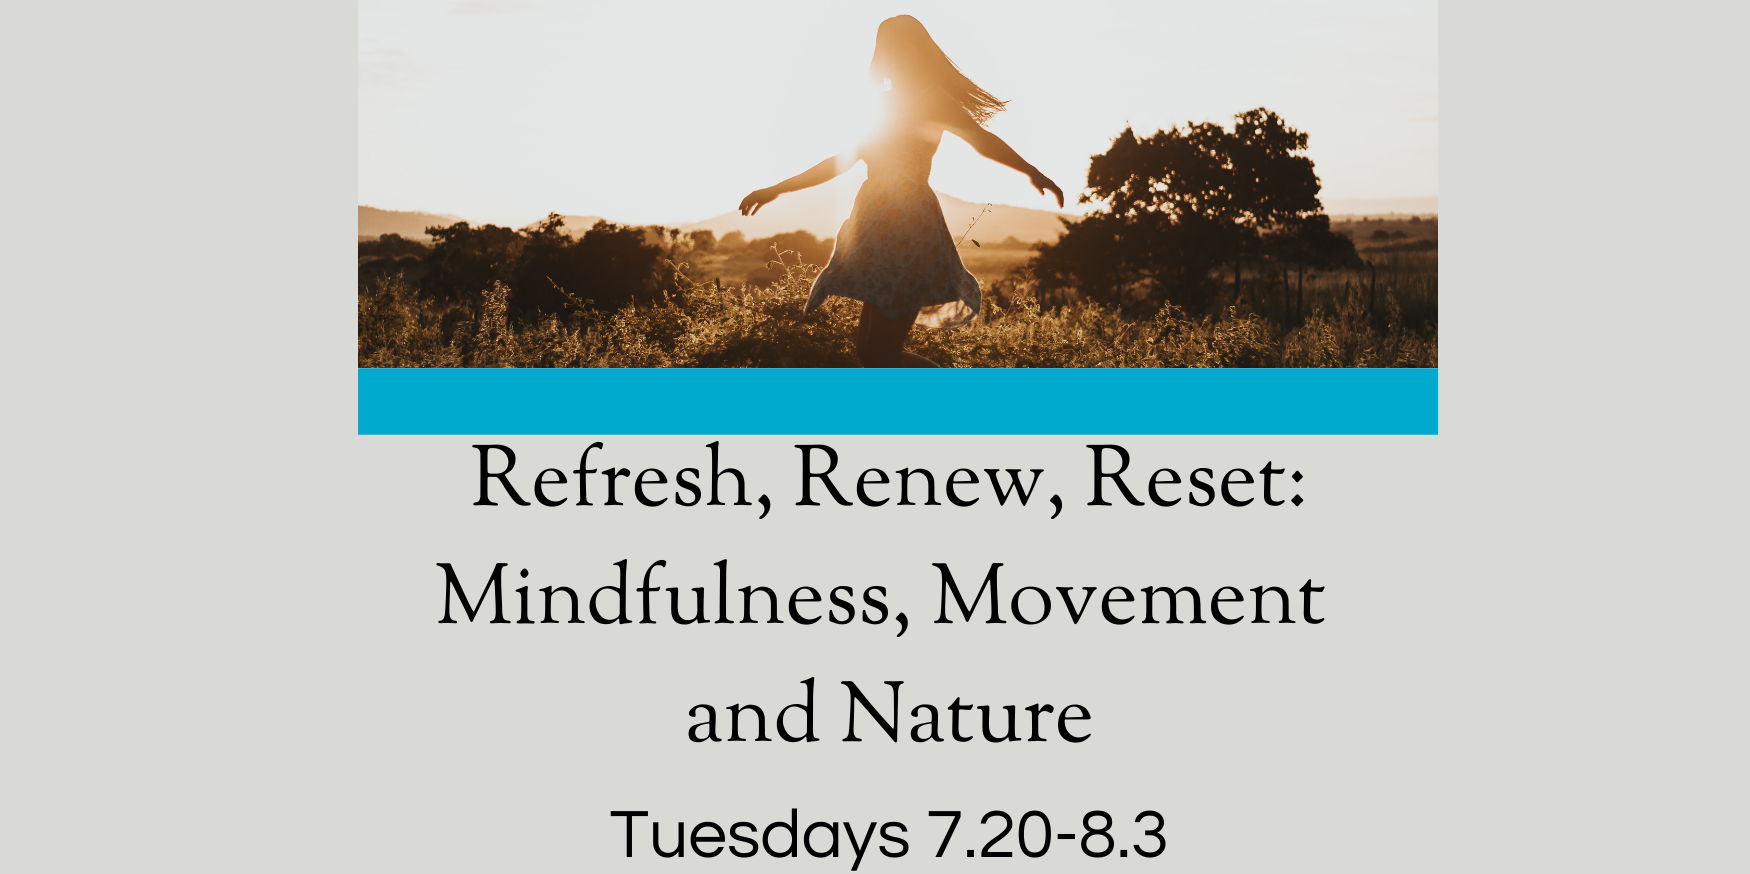 Refresh, Renew, Reset: Mindfulness, Movement and Nature promotional image